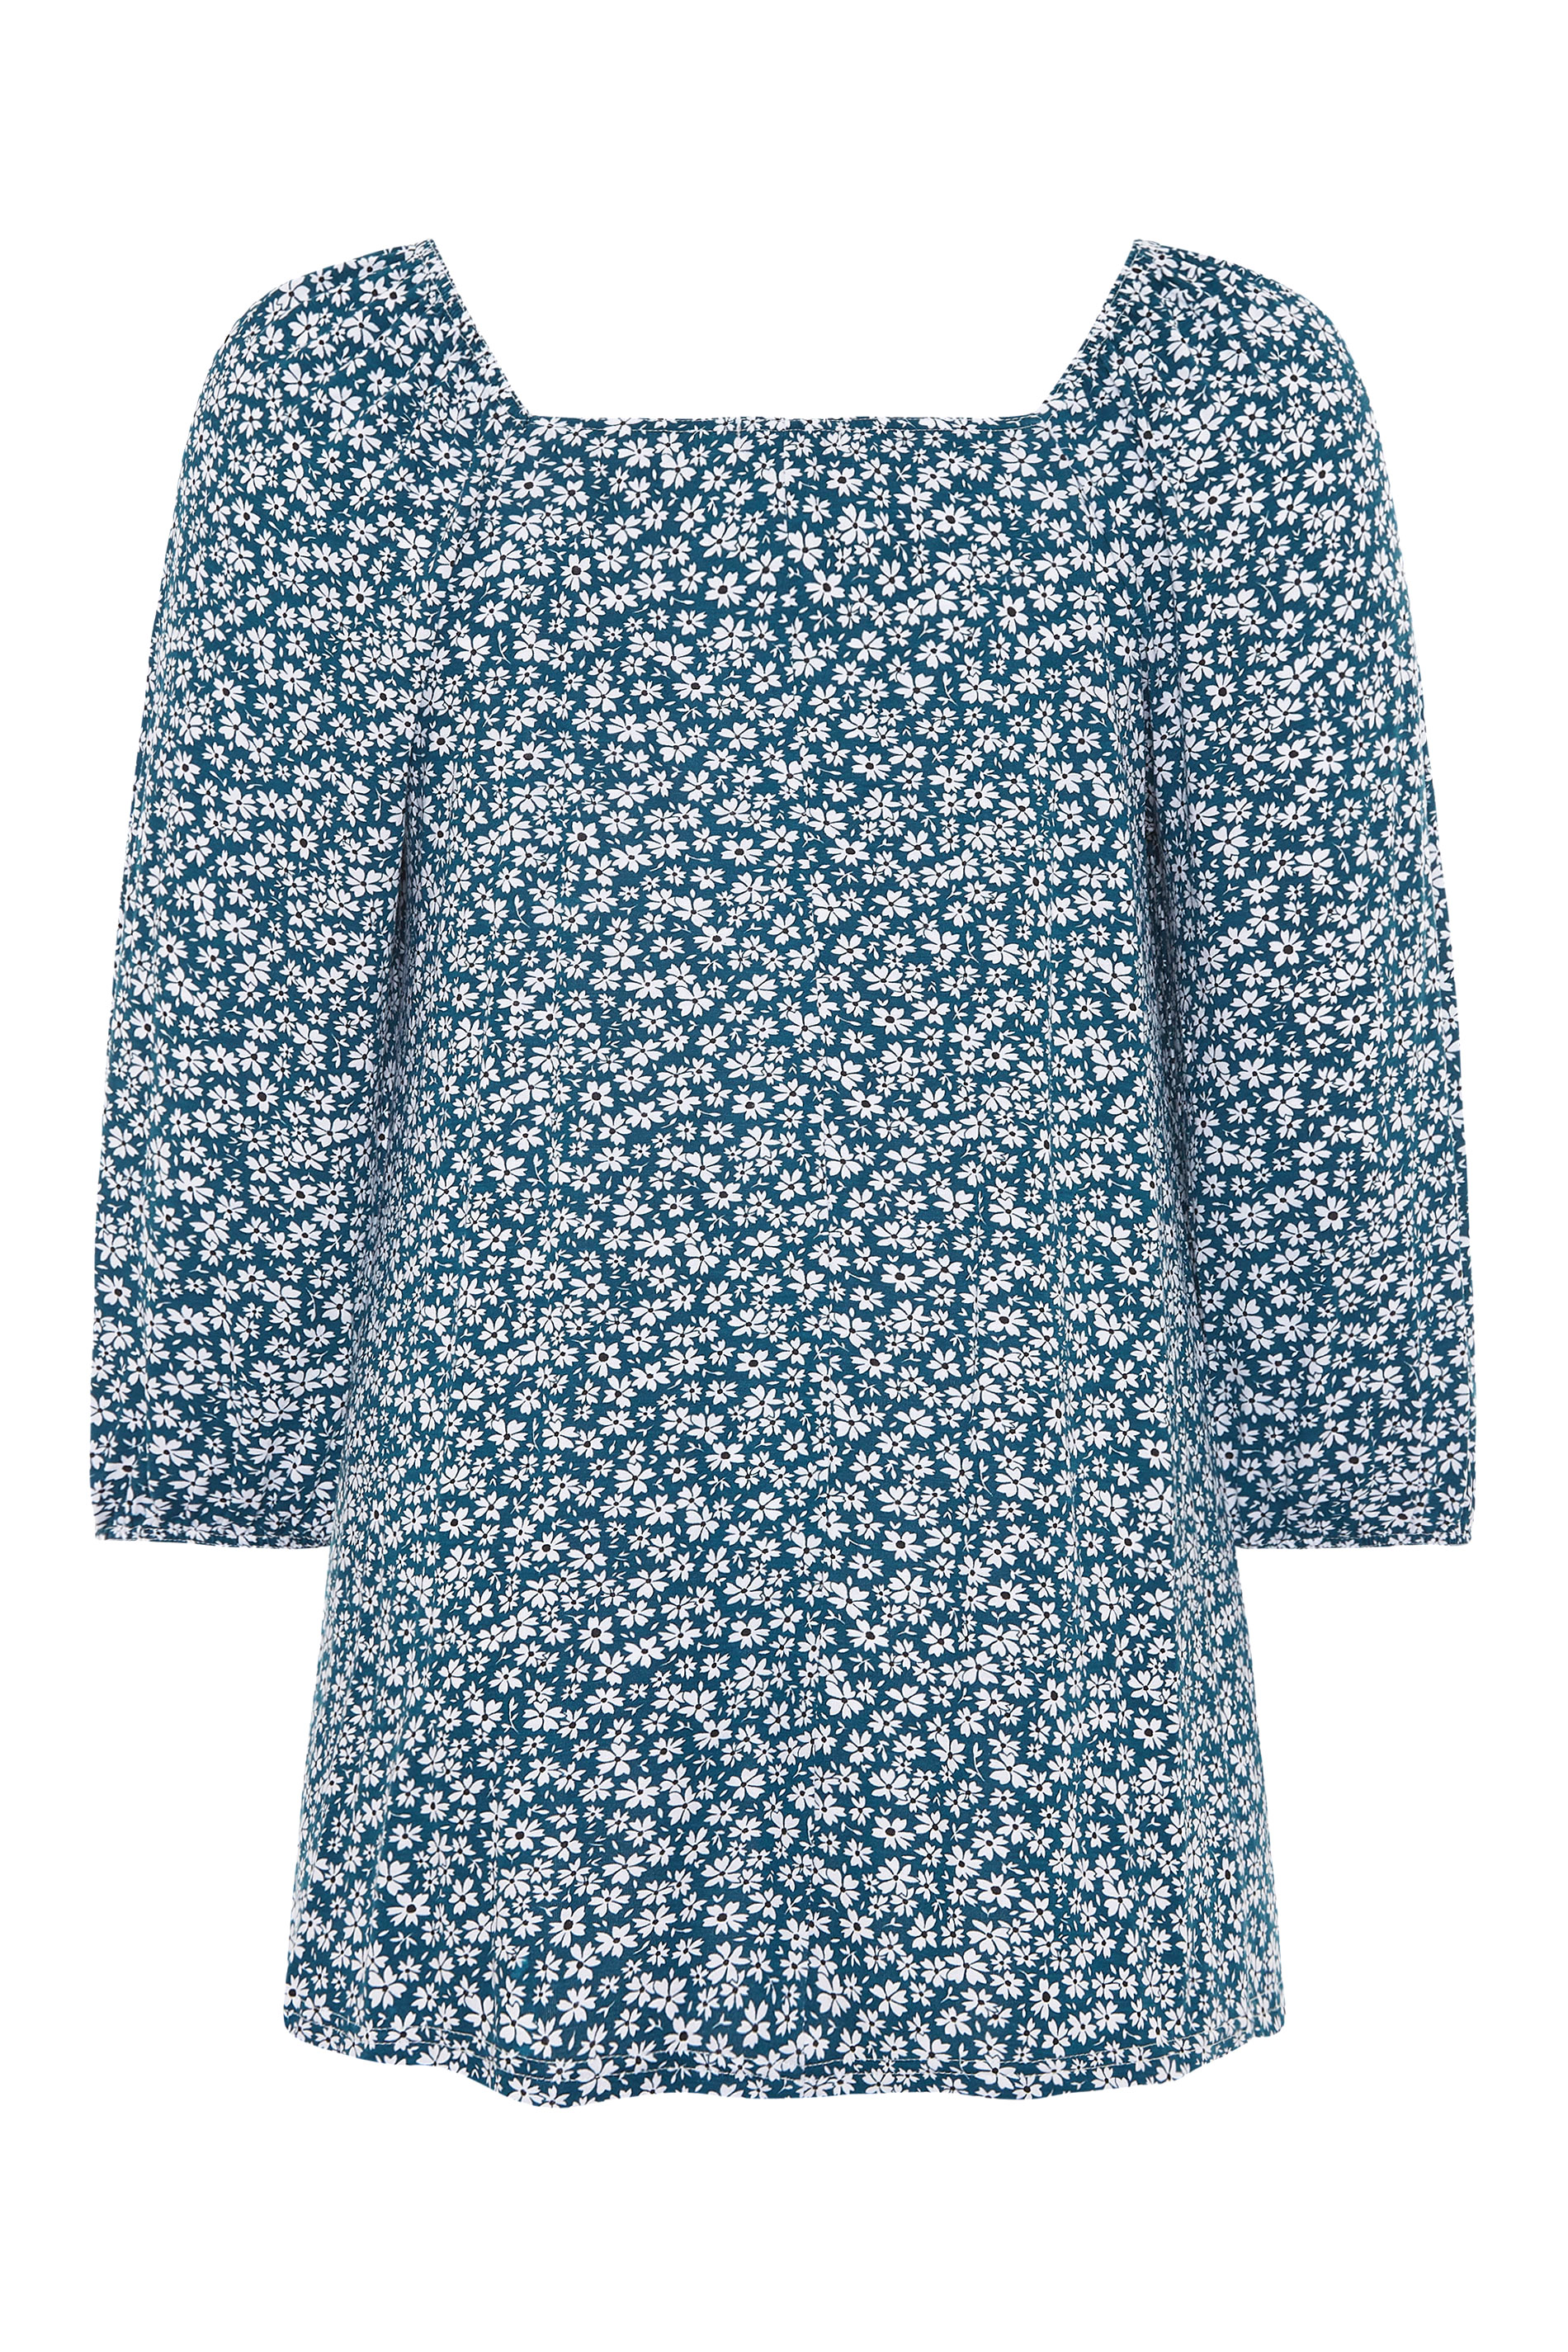 LIMITED COLLECTION Teal Daisy Print Top | Yours Clothing